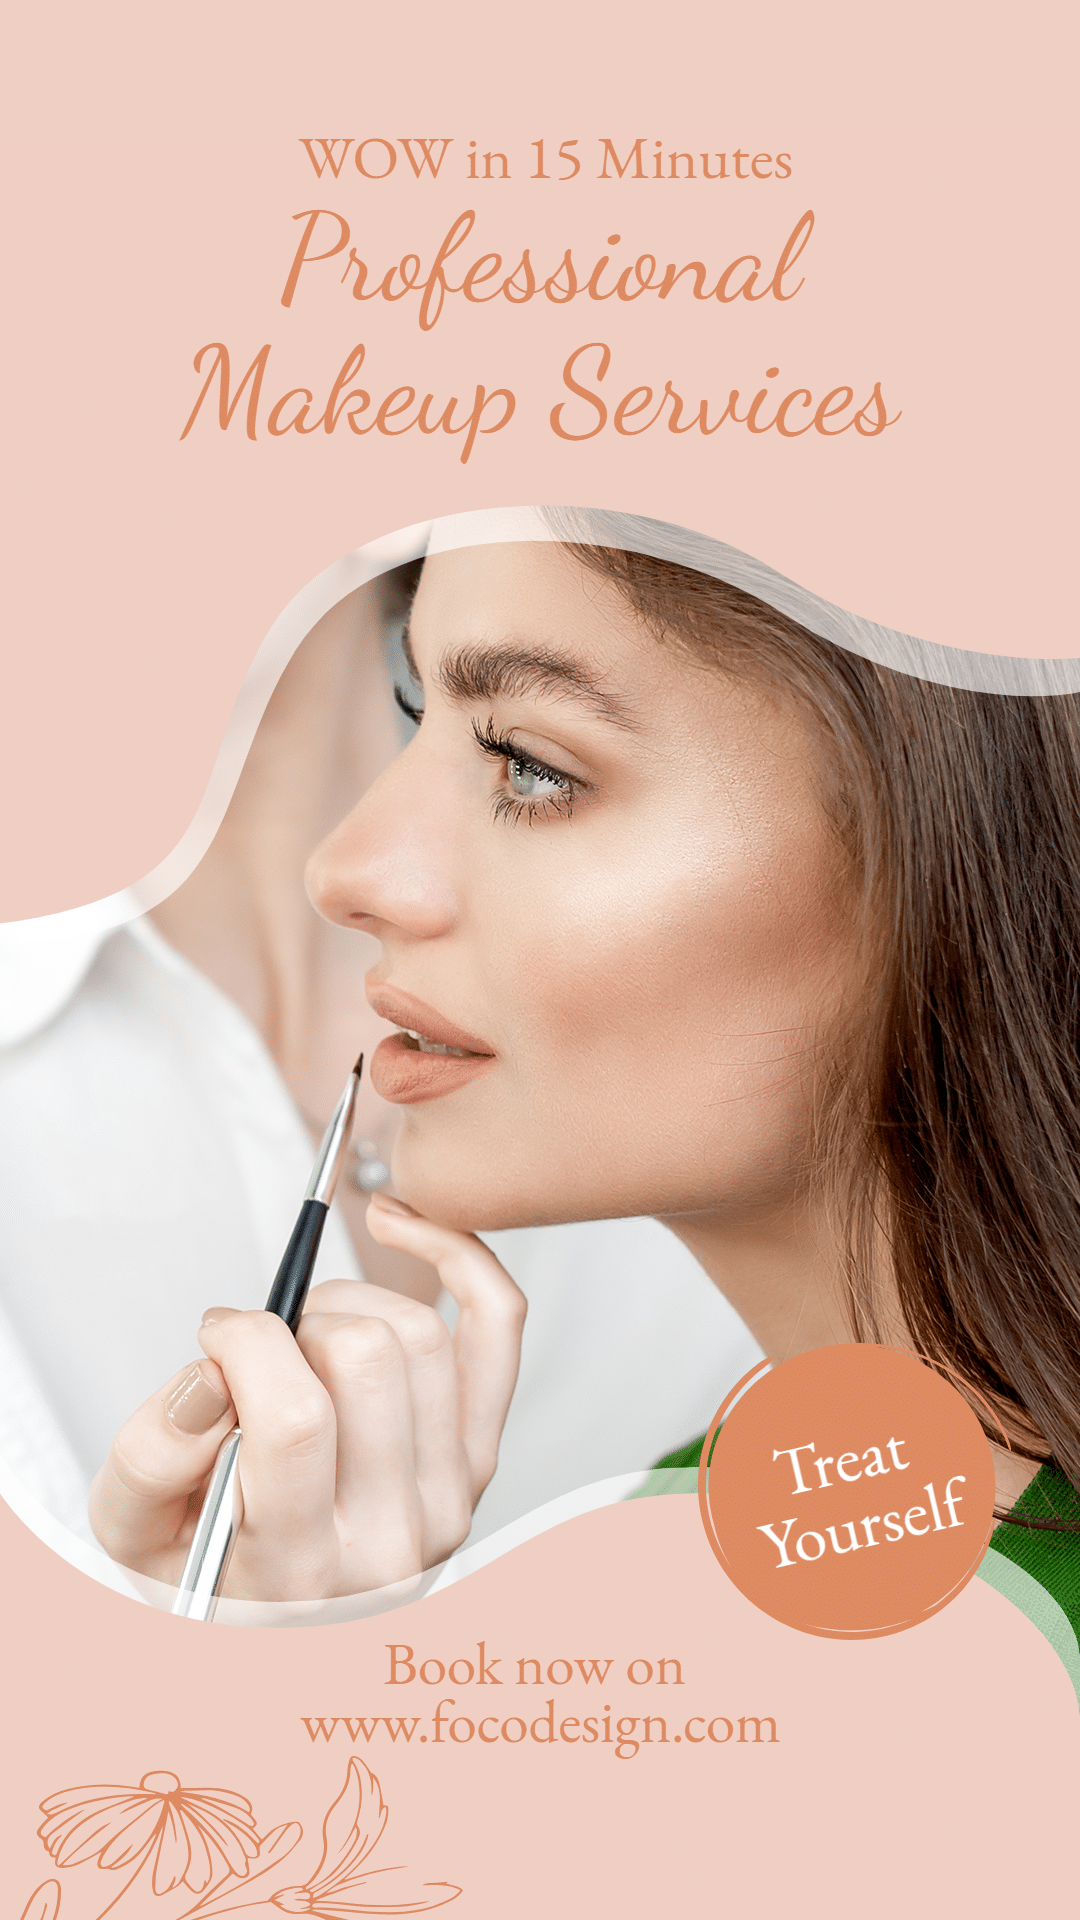 Professional Makeup Services Advertisement Ecommerce Story